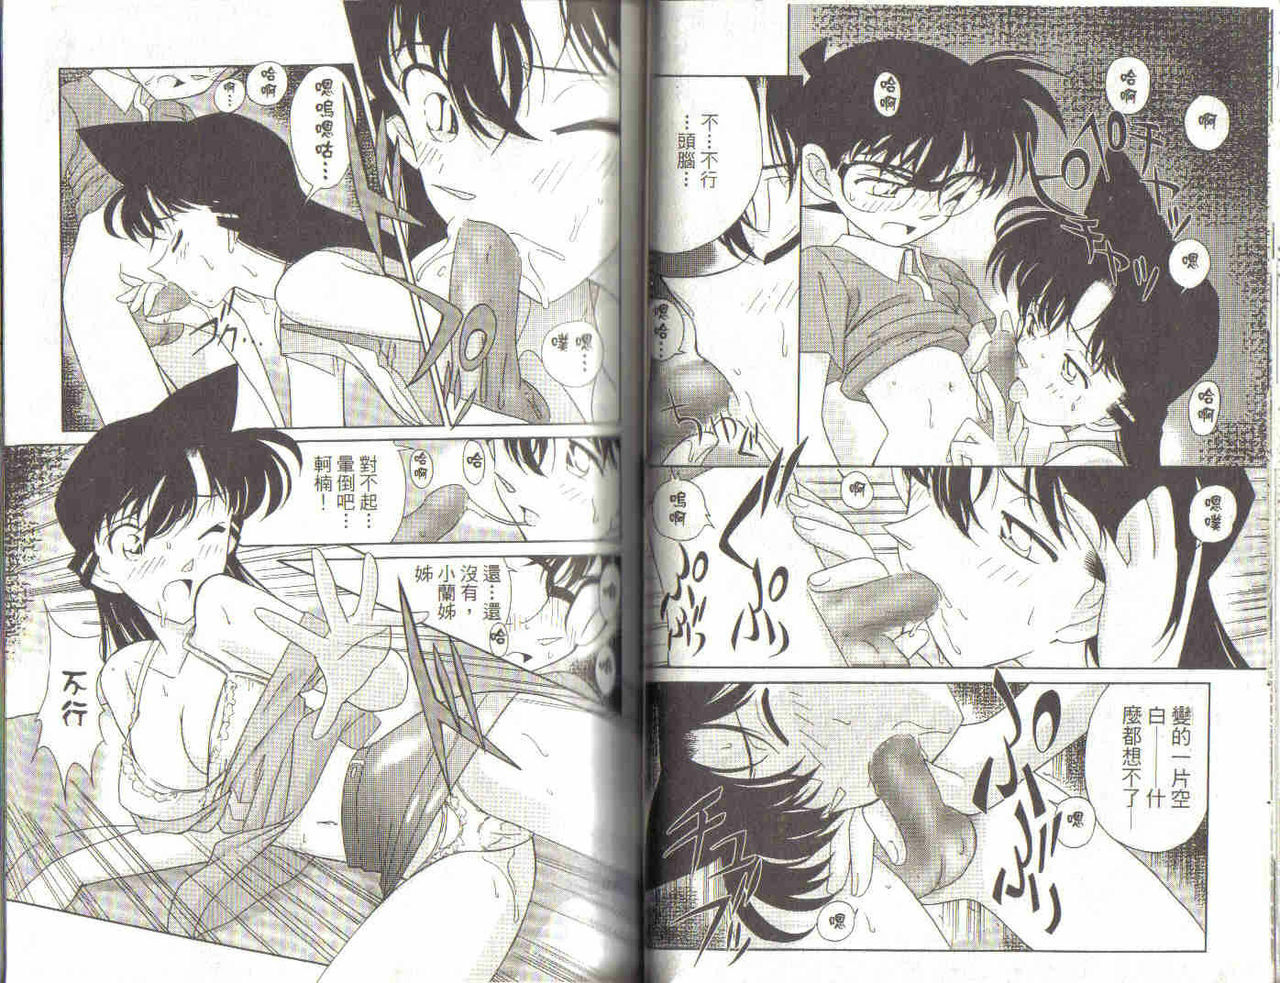 [Ooya Nako] Detective Assistant Vol. 3 (Detective Conan) [Chinese] page 33 full